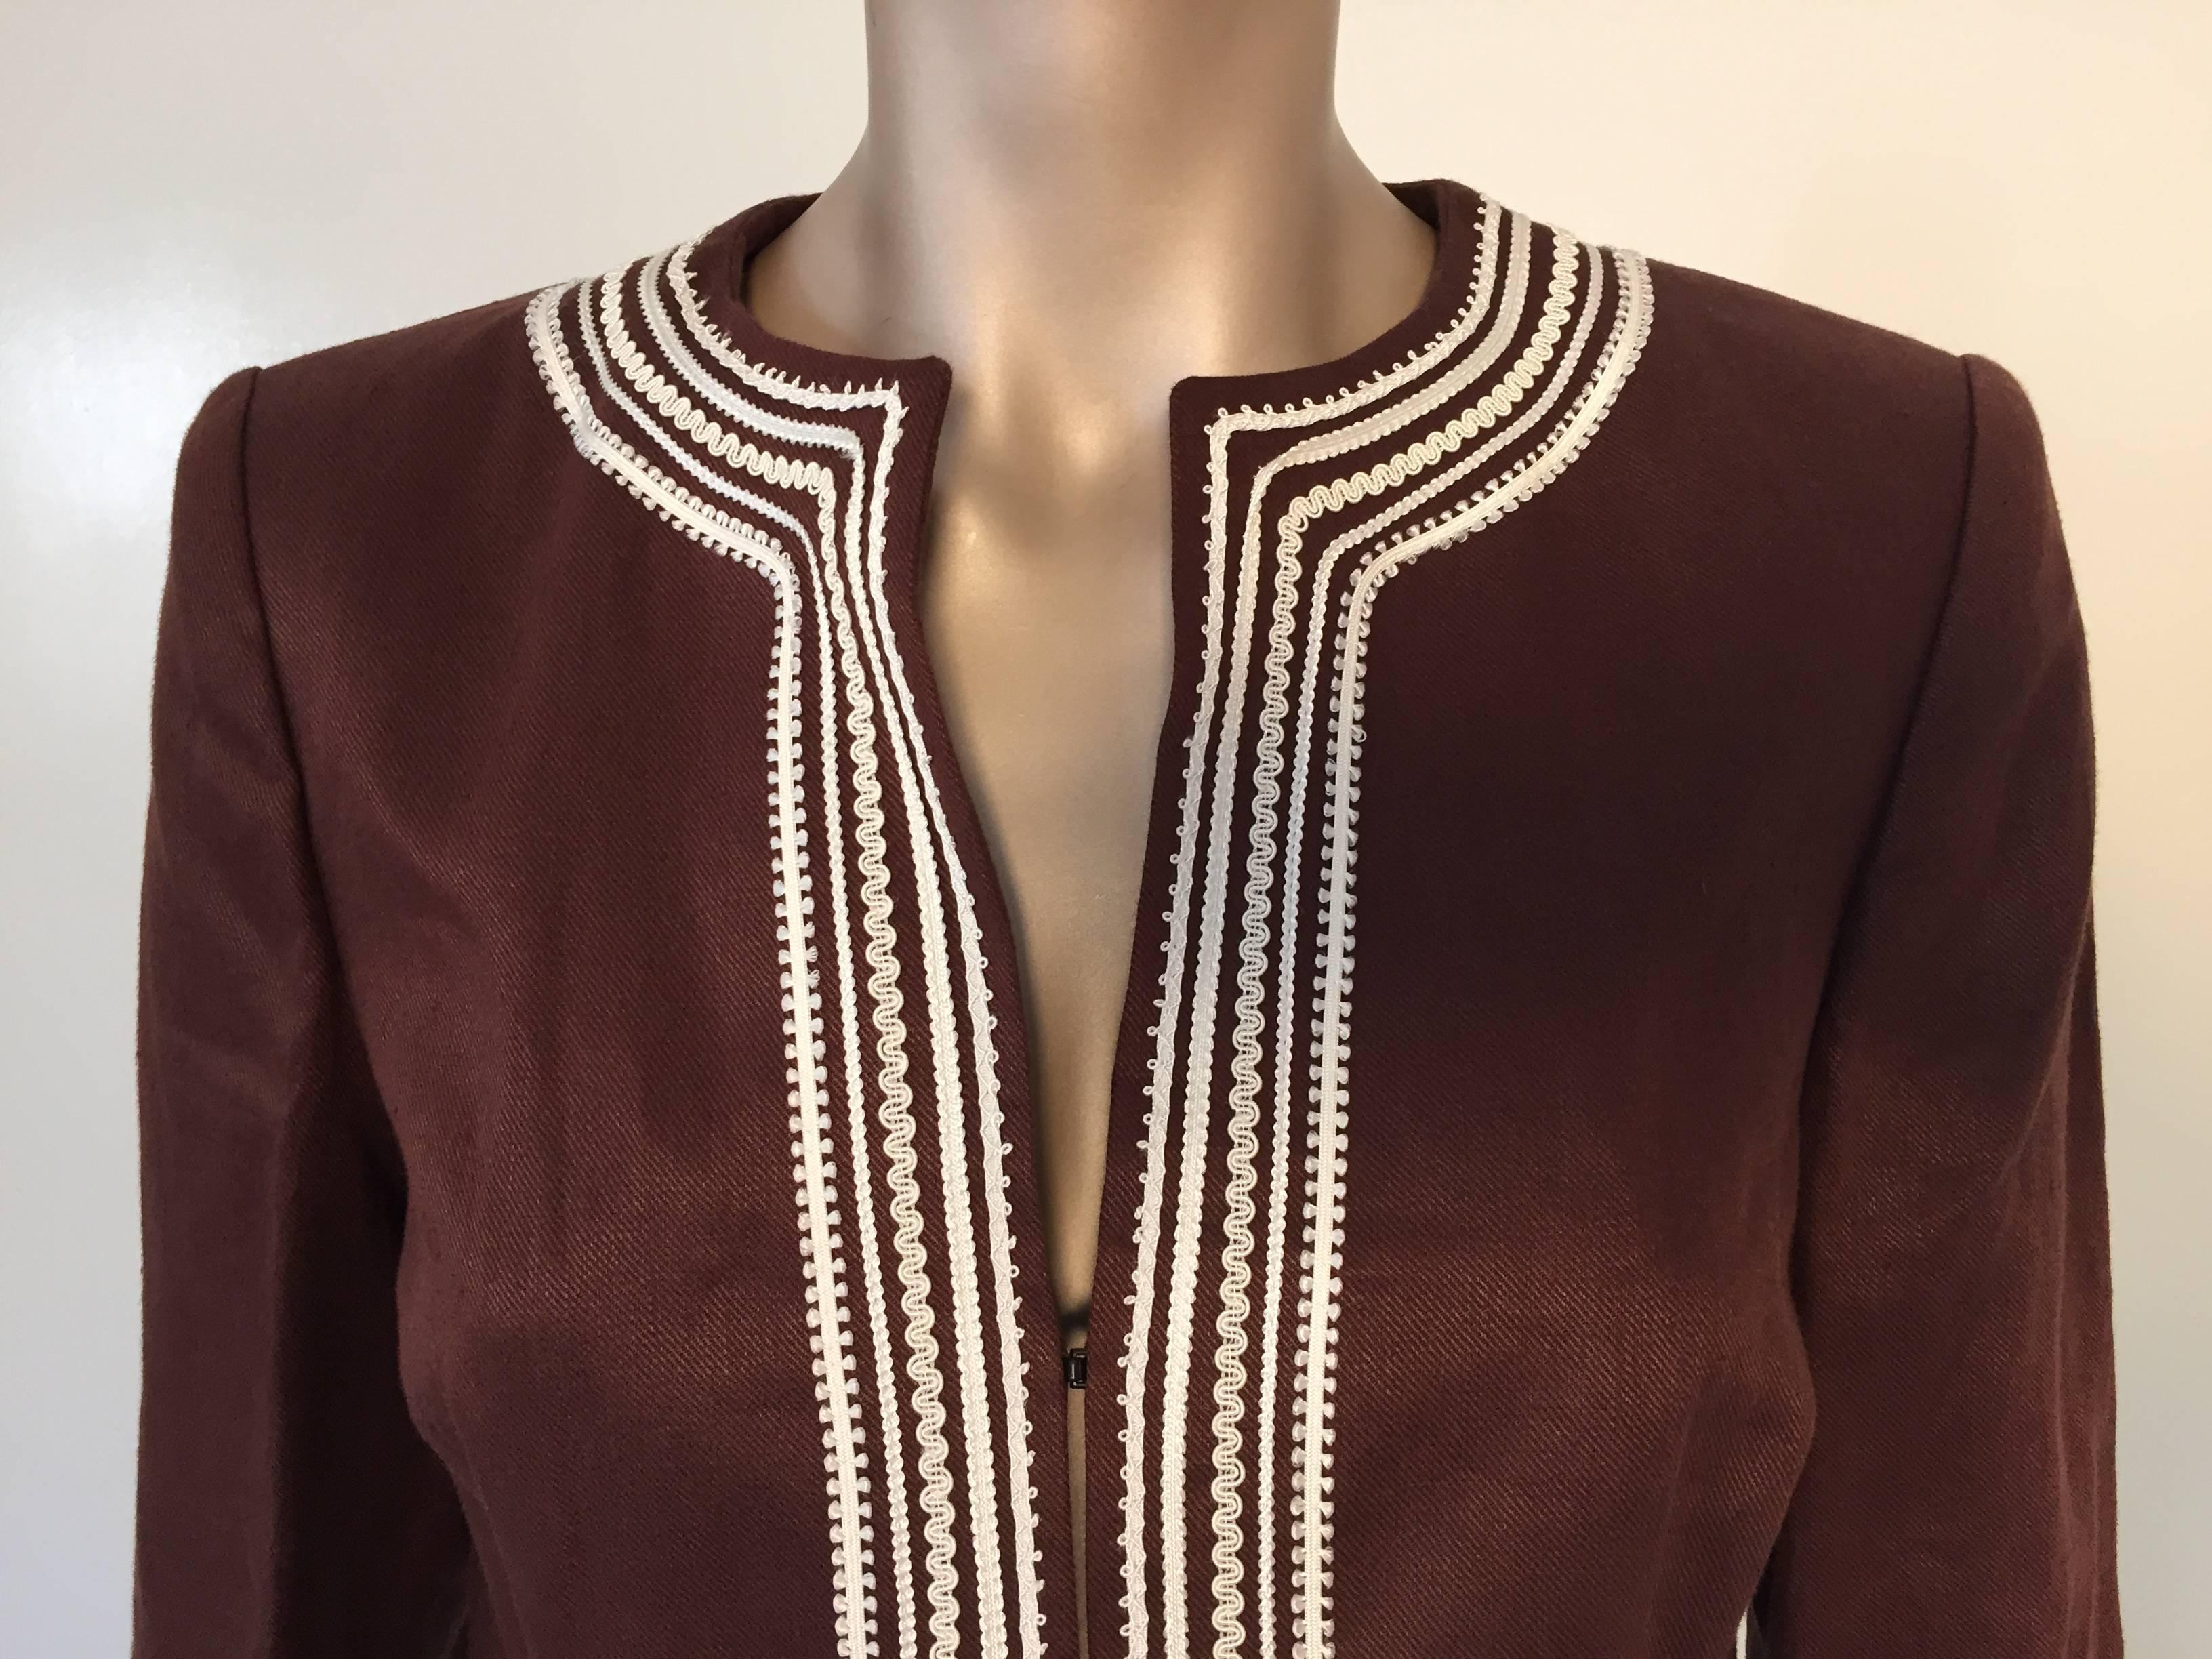 Escada linen Moroccan caftan style dress coat.
Linen chocolate brown color with white embroideries.
Very elegant Moroccan style kaftan dress or coat, wear it closed or open.
Beautiful, elegant Moroccan, bohemian style caftan tunic dress.
Like many